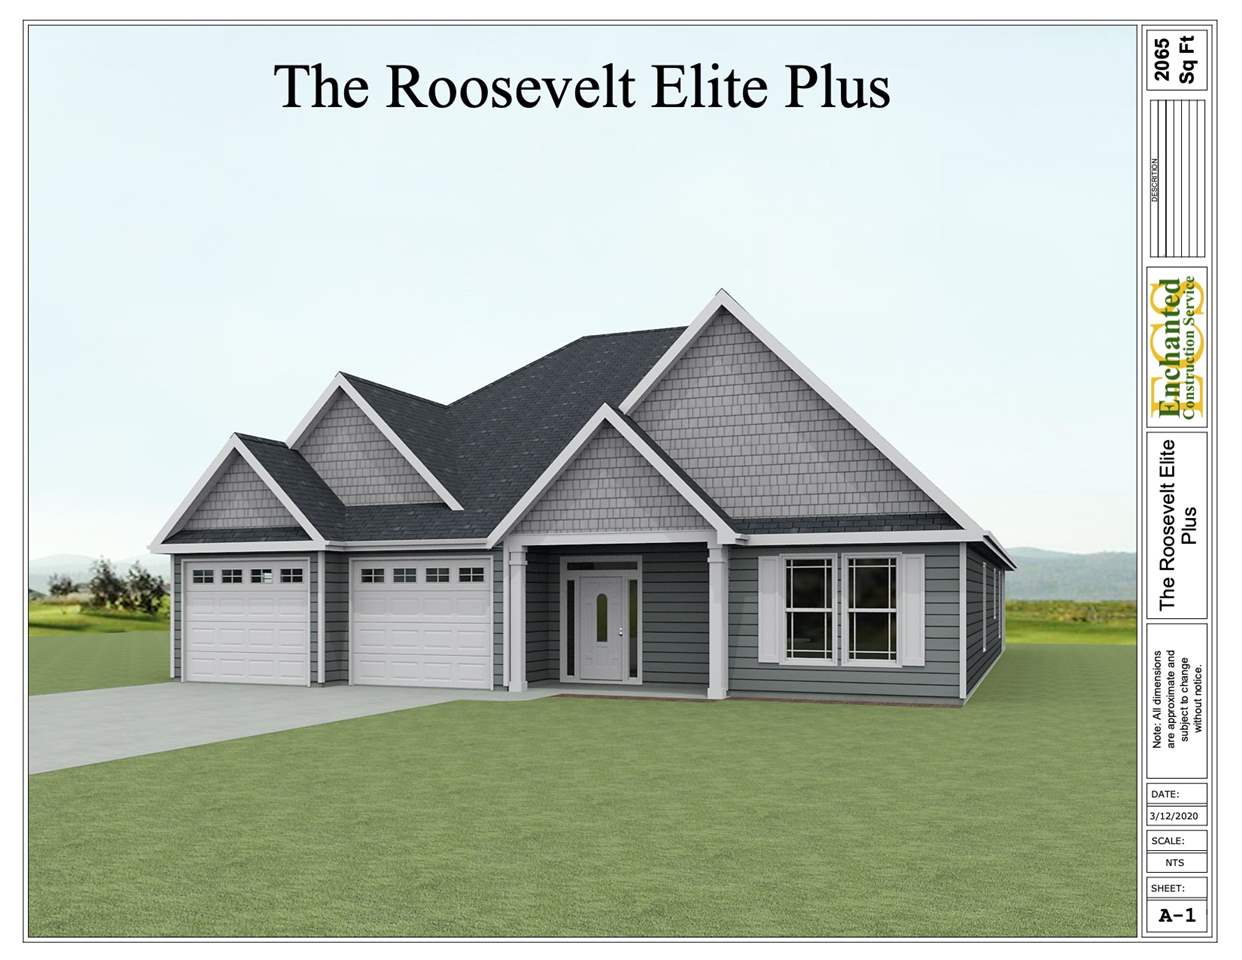 The Rosevelt Elite with basement has over 3300 Square Feet. The Roosevelt Elite on a finished basement will feature 4 Bedrooms 3 Bath with multiple living rooms and office. This home will feature granite counter tops, 5 inch engineered hardwood floors, crown molding, and a covered patio off the master bedroom. Choose this home or one of many homes in this neighborhood. Want to build custom bring your plan and let us price it on one of our lots. Please note “Private landing strip in near vicinity of property.”